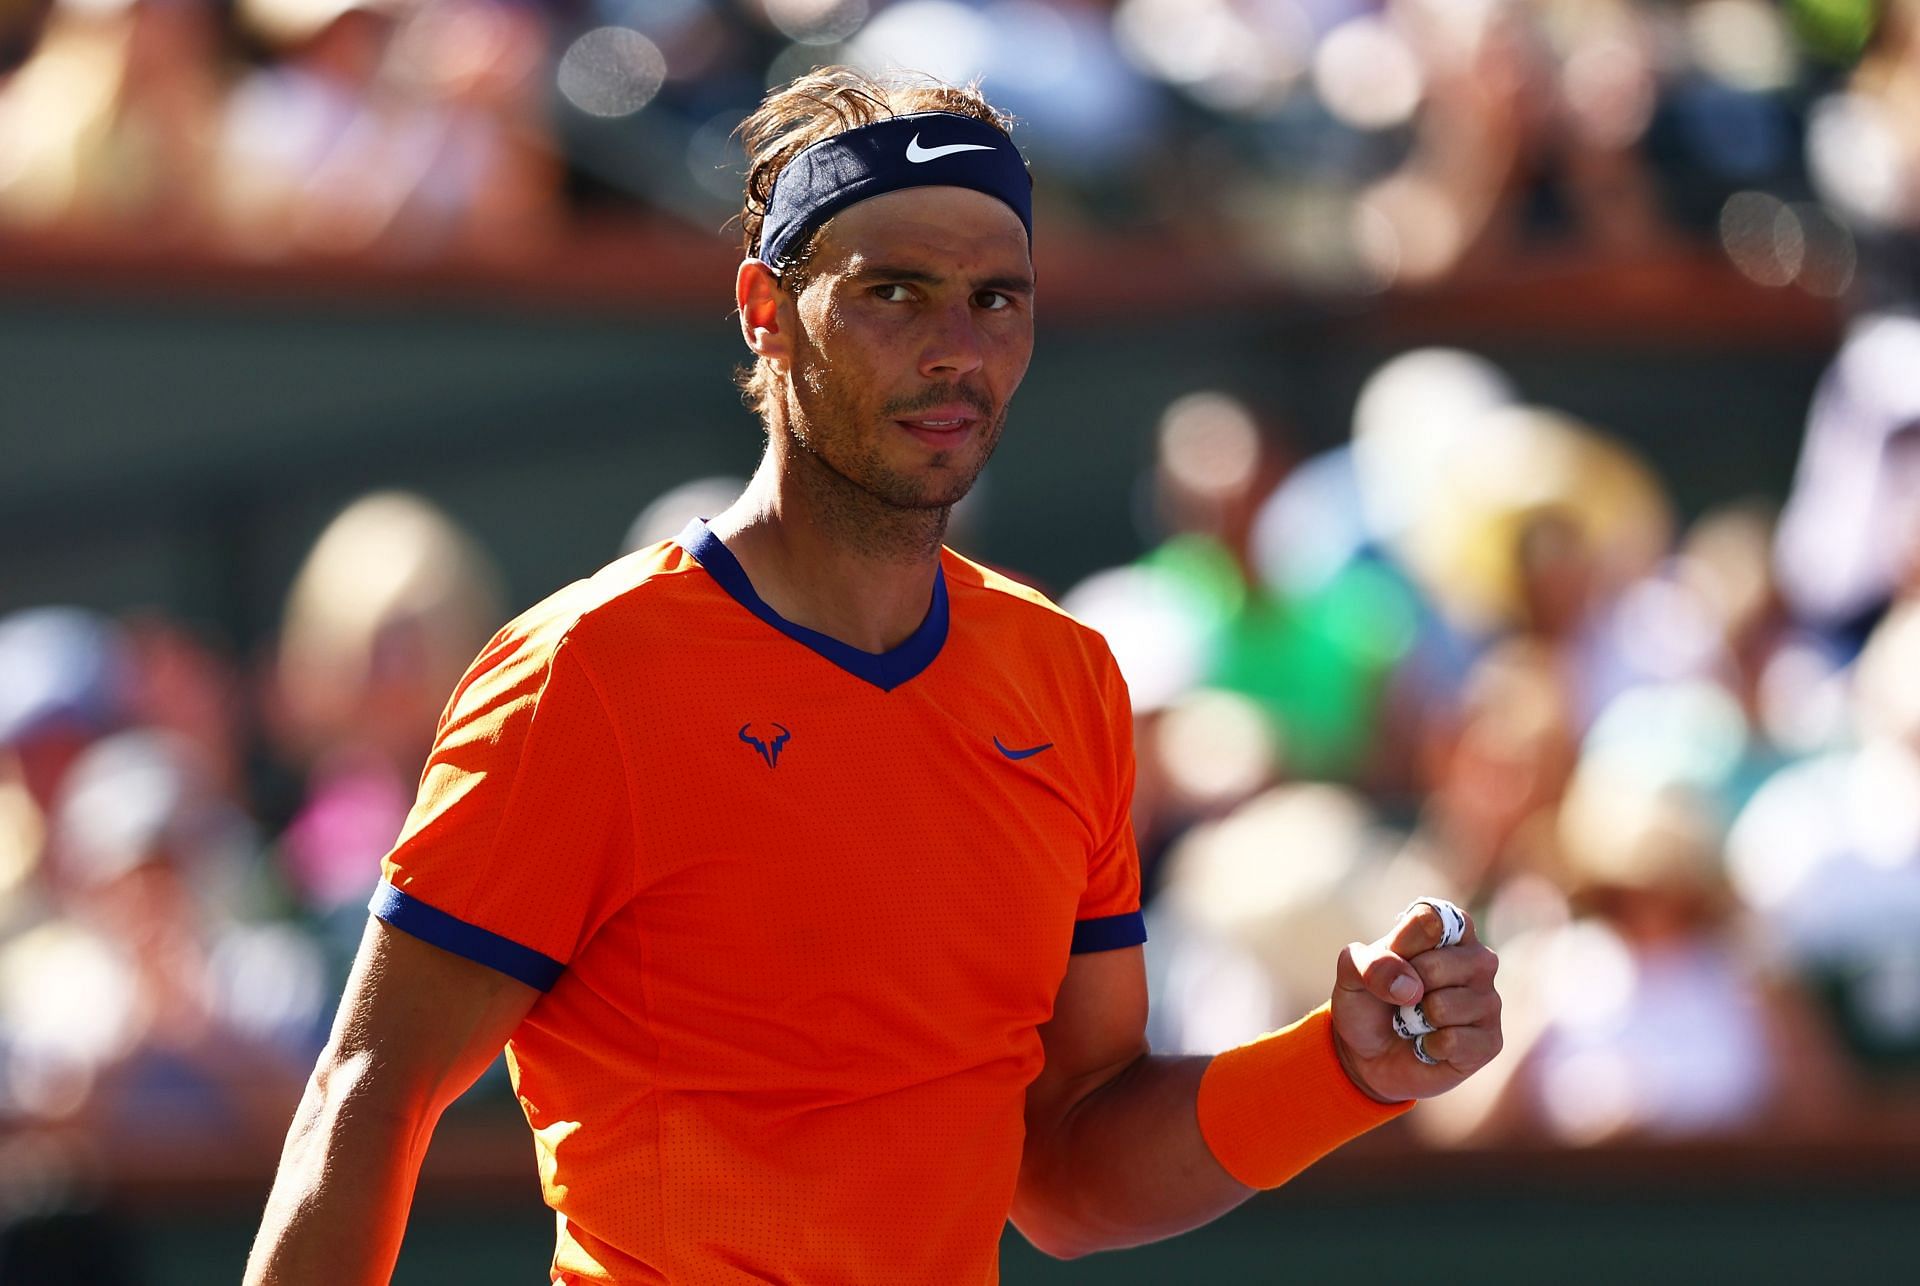 Rafael Nadal revealed that he withdrew from the Miami Masters to better prepare for the clay season